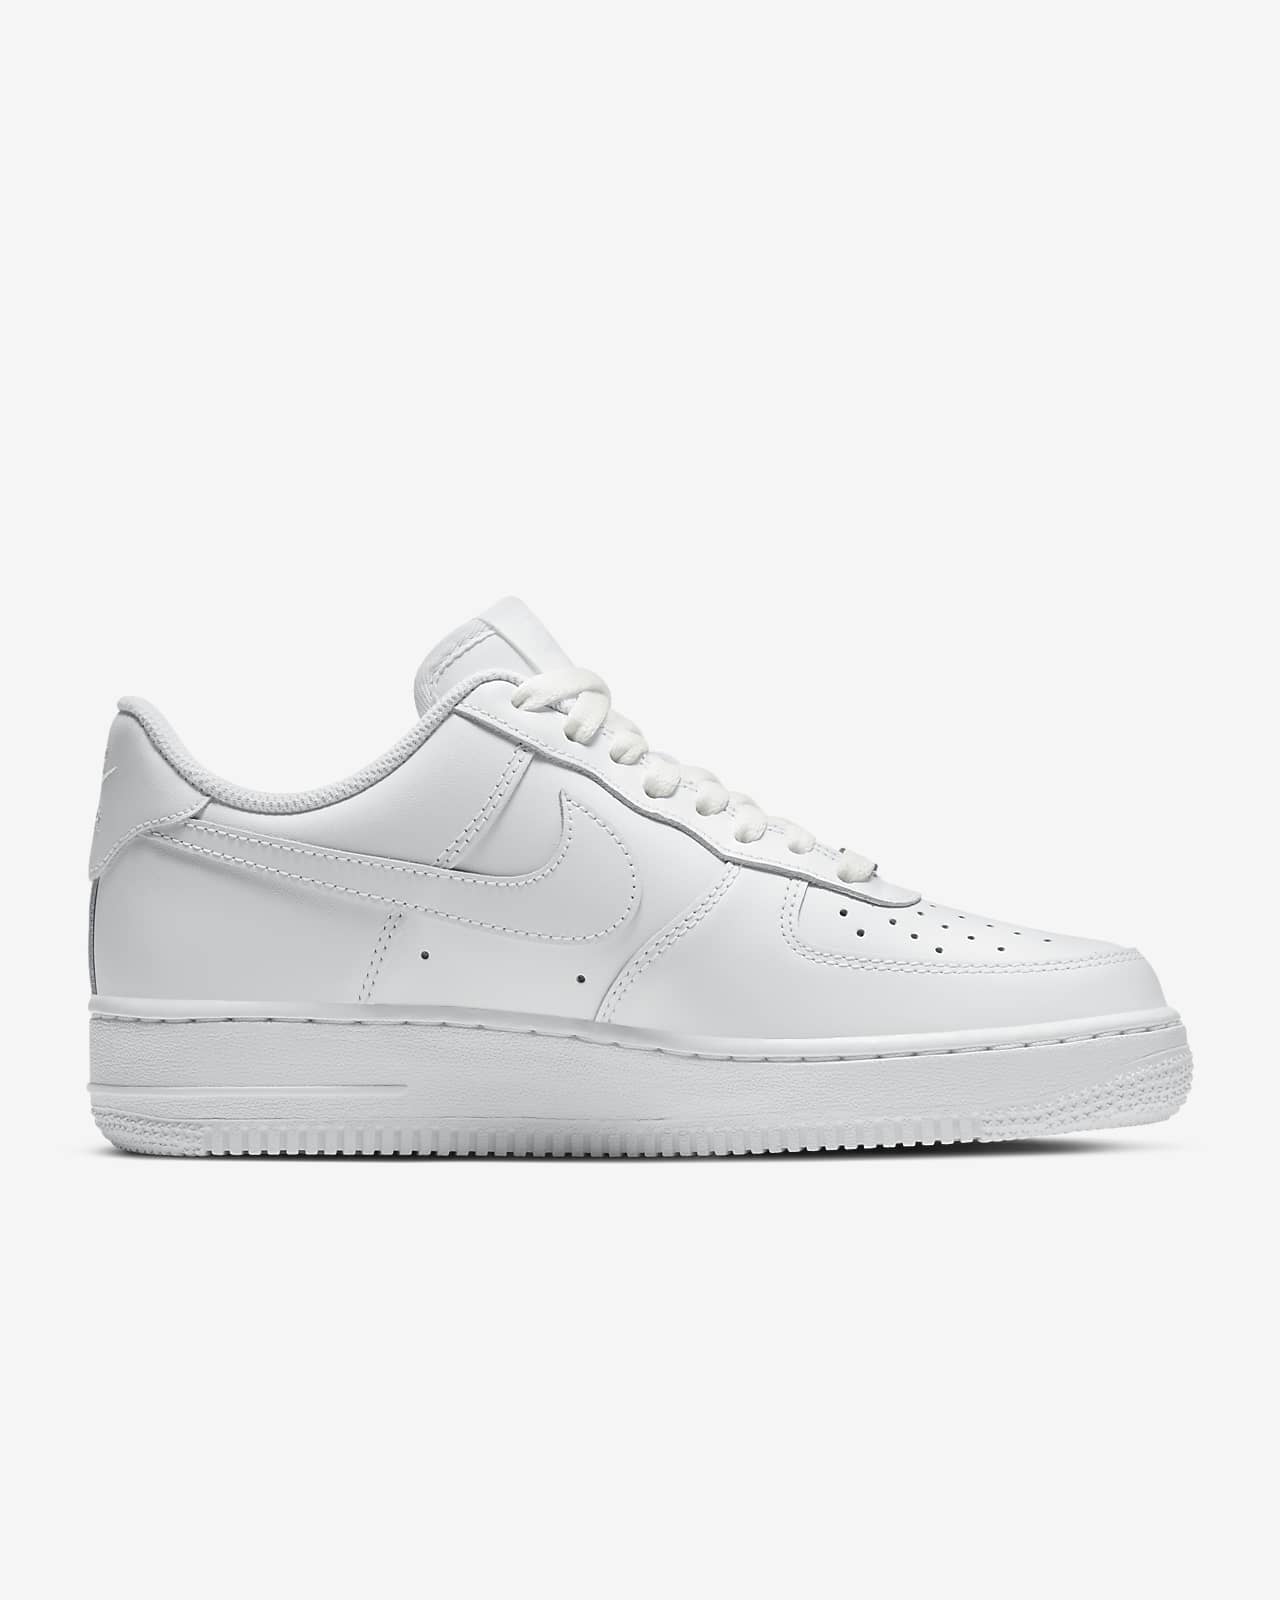 womens nike air force 1 07 size 8